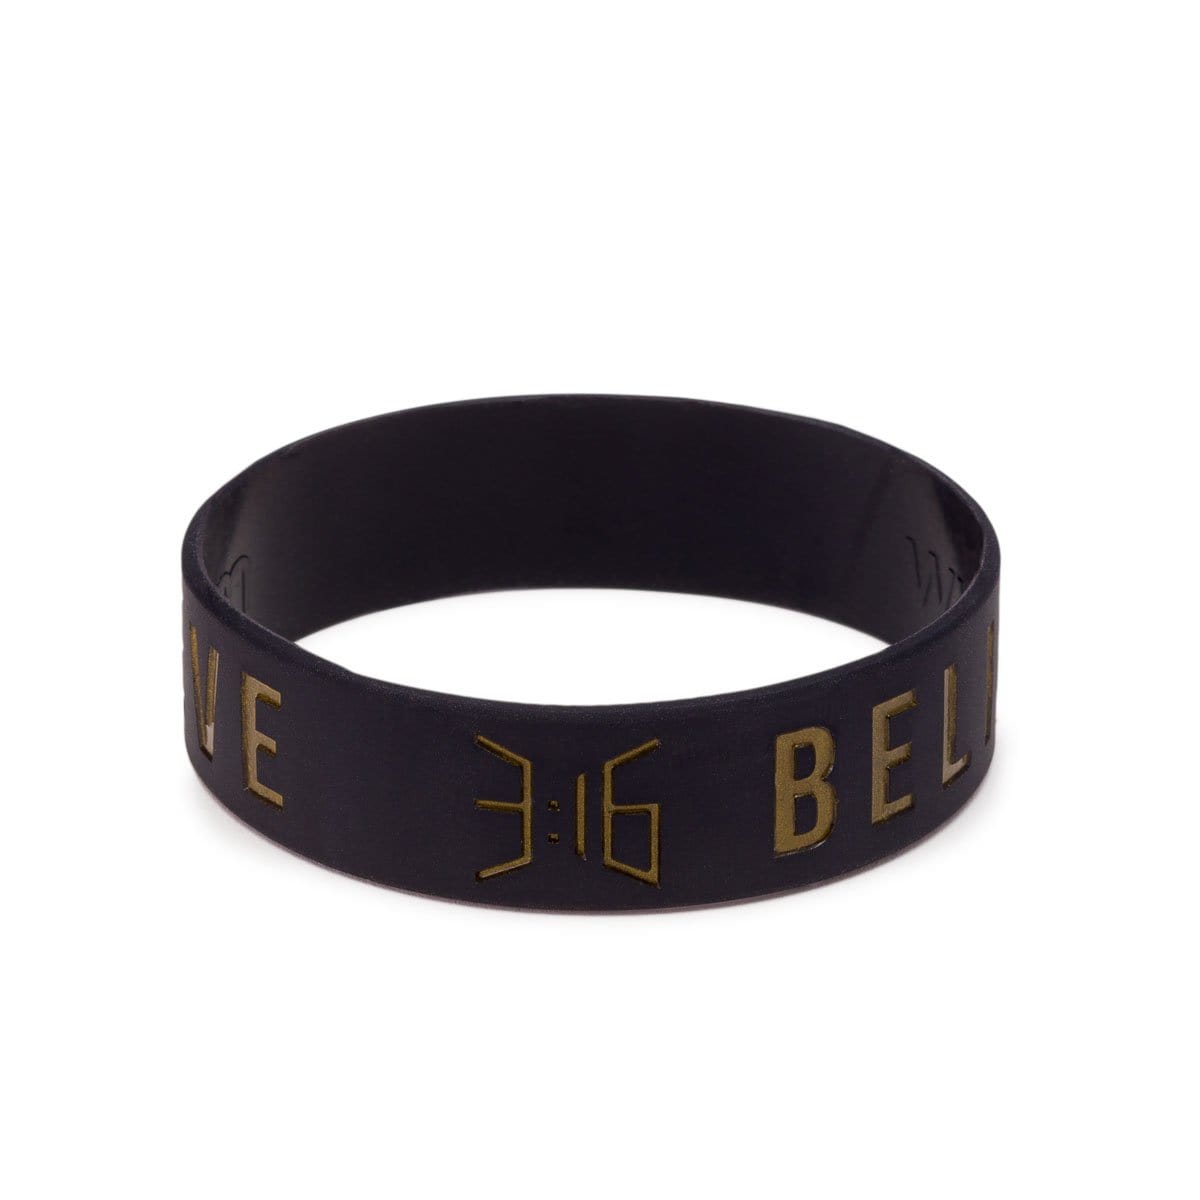 3:16 Collection Jewelry Believe Wristband